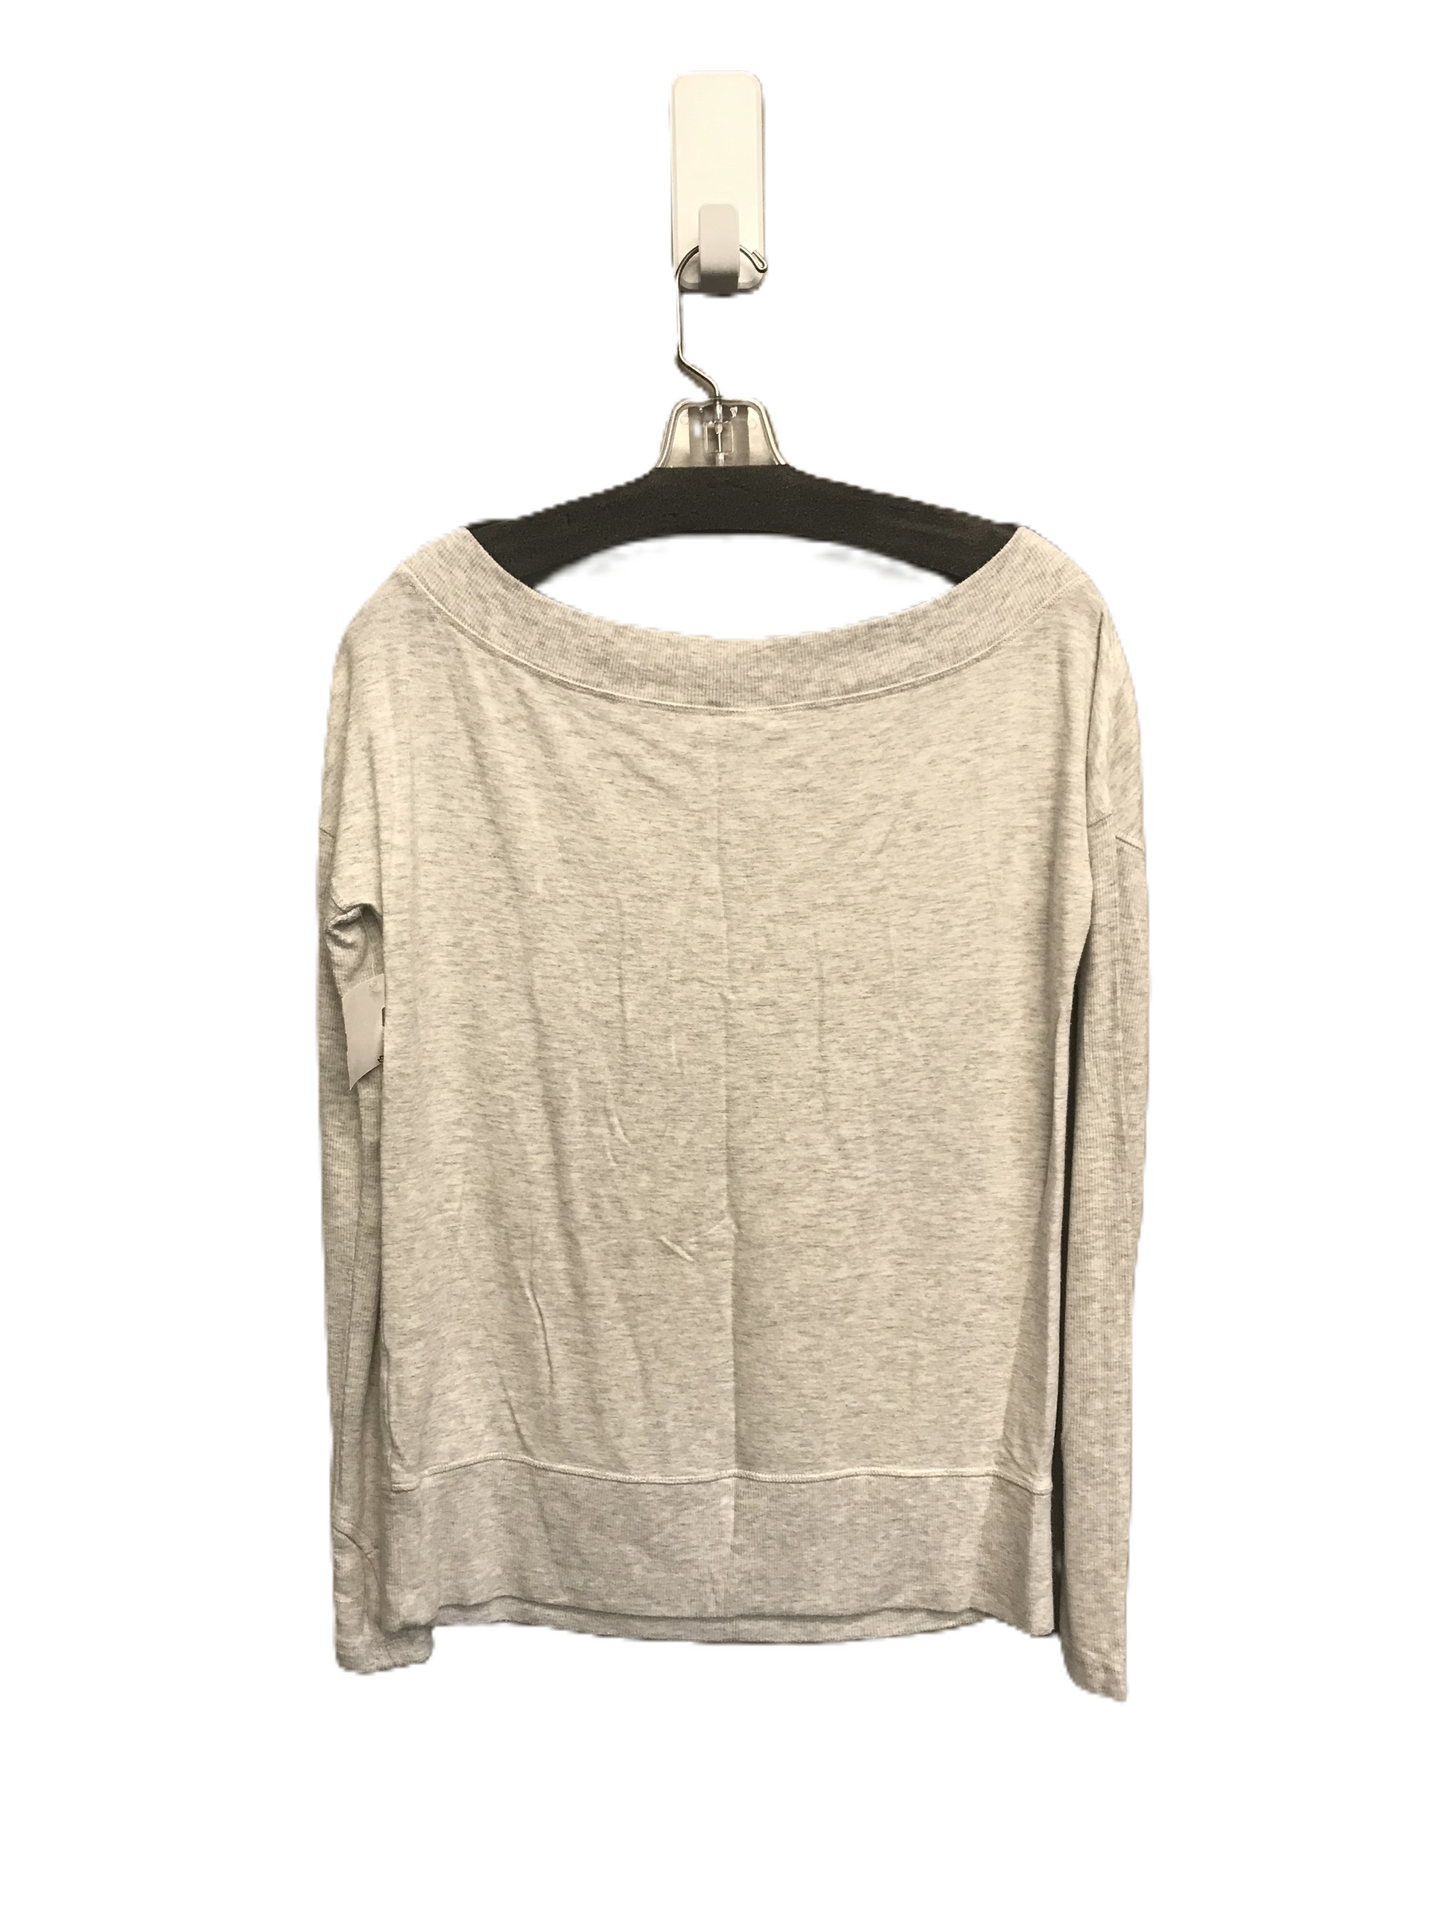 Grey Top Long Sleeve By Athleta, Size: S